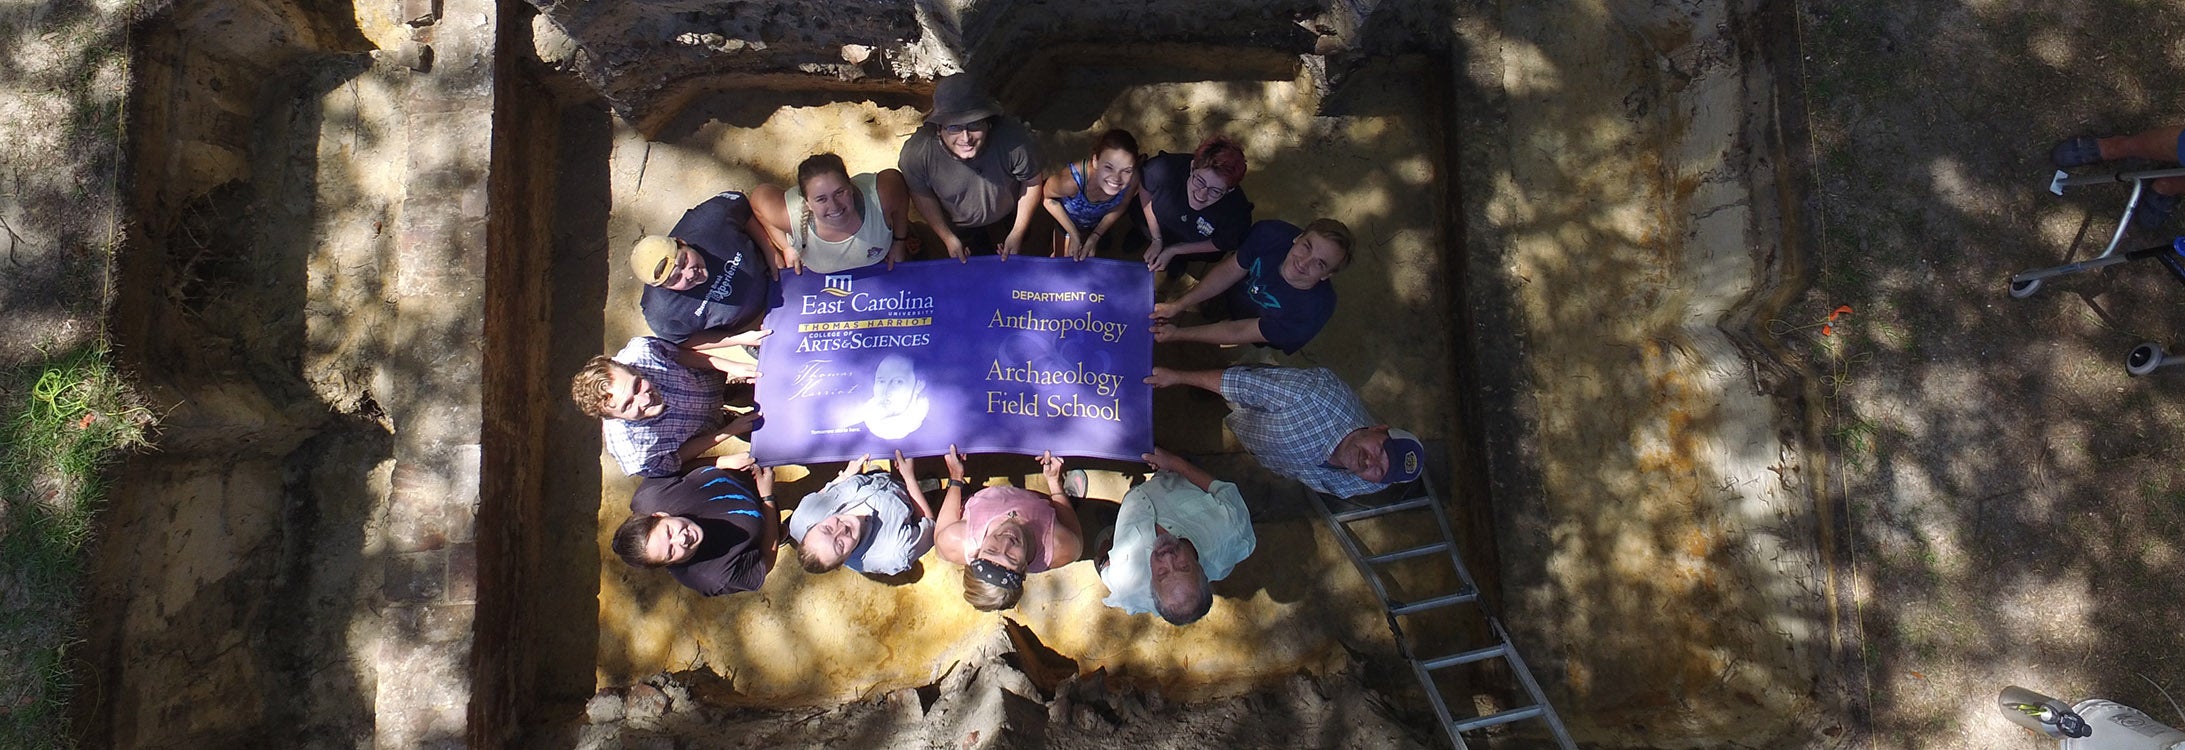 A dozen ECU students spent four weeks this summer excavating the remains of a previously unknown 18th century tavern near Southport. <br>(Photo courtesy of Drew Conca, Brunswick Town Historic Site)